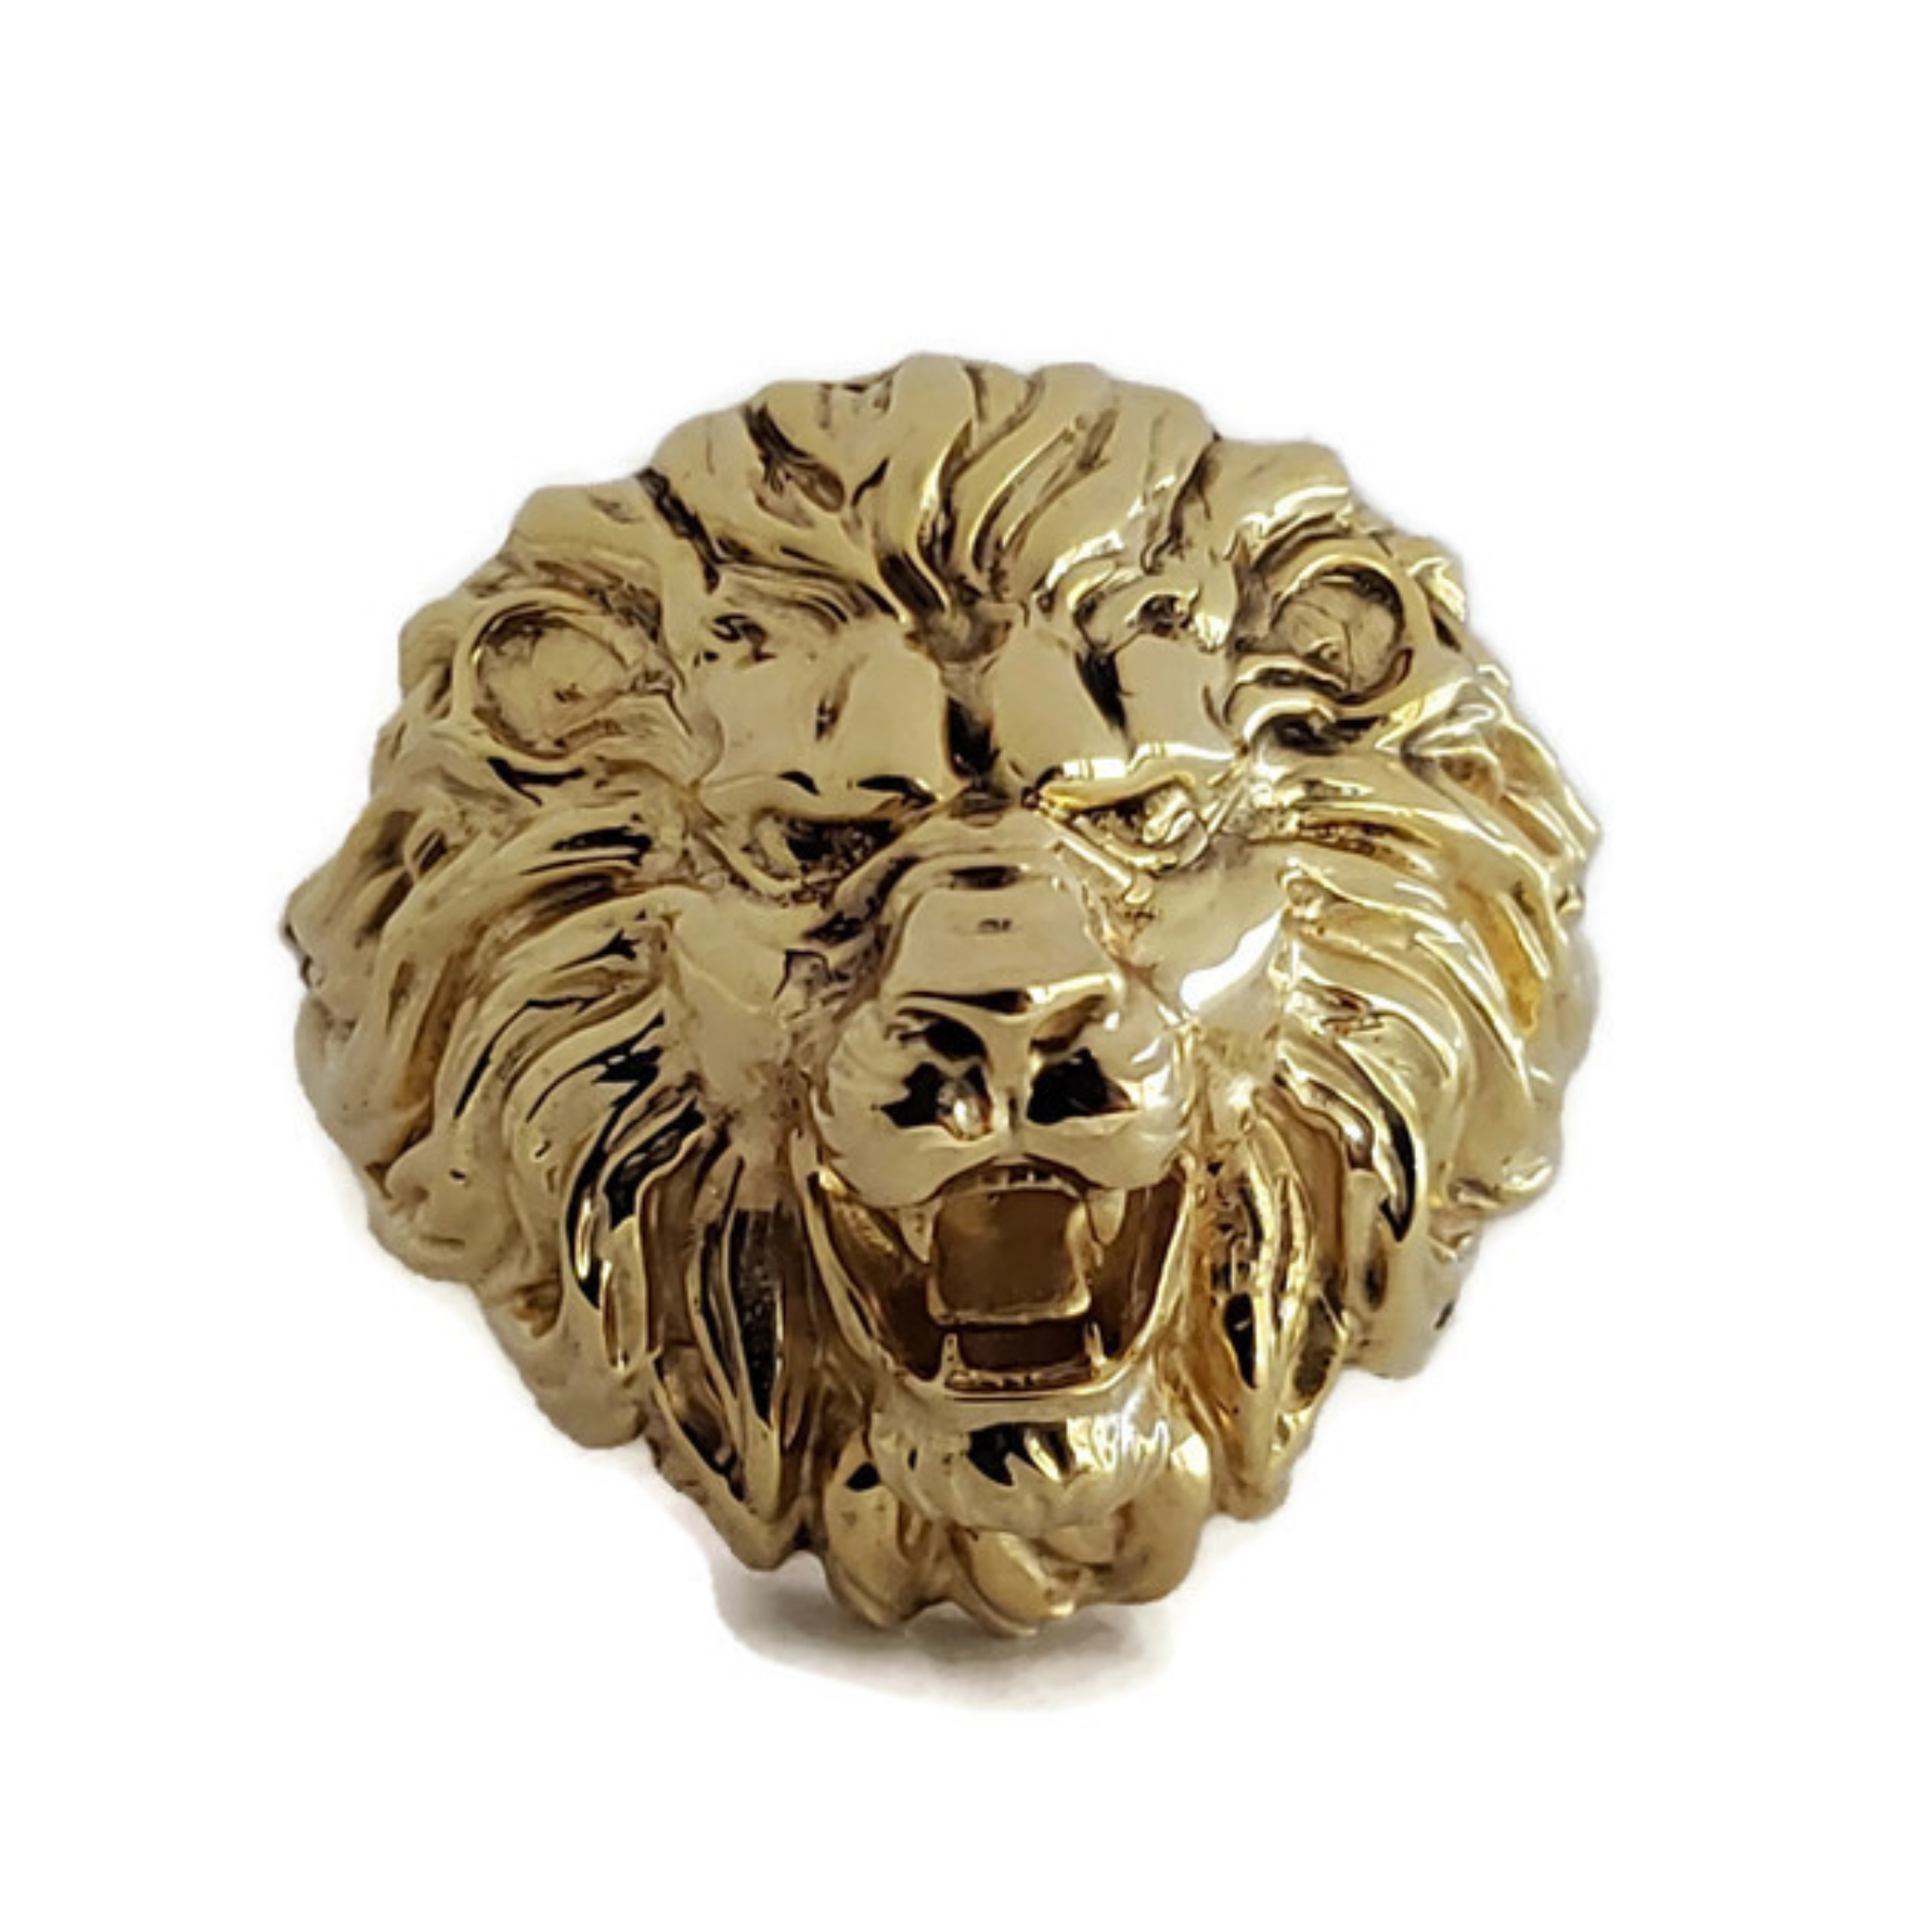 6.5 gm Lion Ring Collection | 1.5 gm Hollow Ring Collection | Maharaja Gold  and Diamond - YouTube